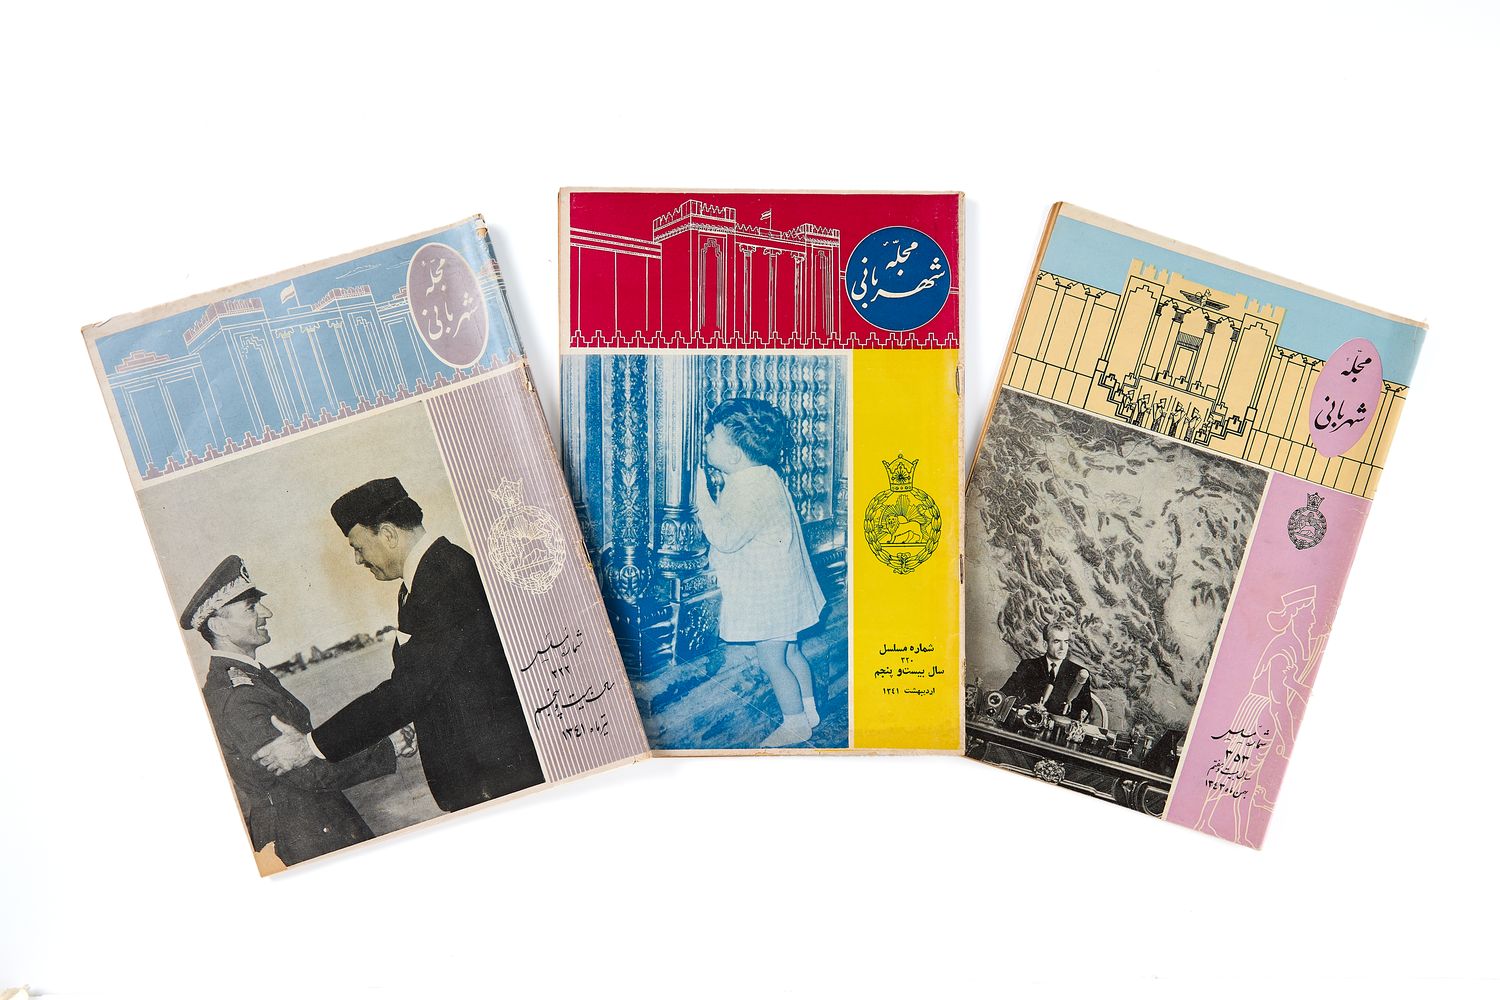 Ɵ Majjale' Shahbani, a collection of 17 volumes of the Iranian periodical